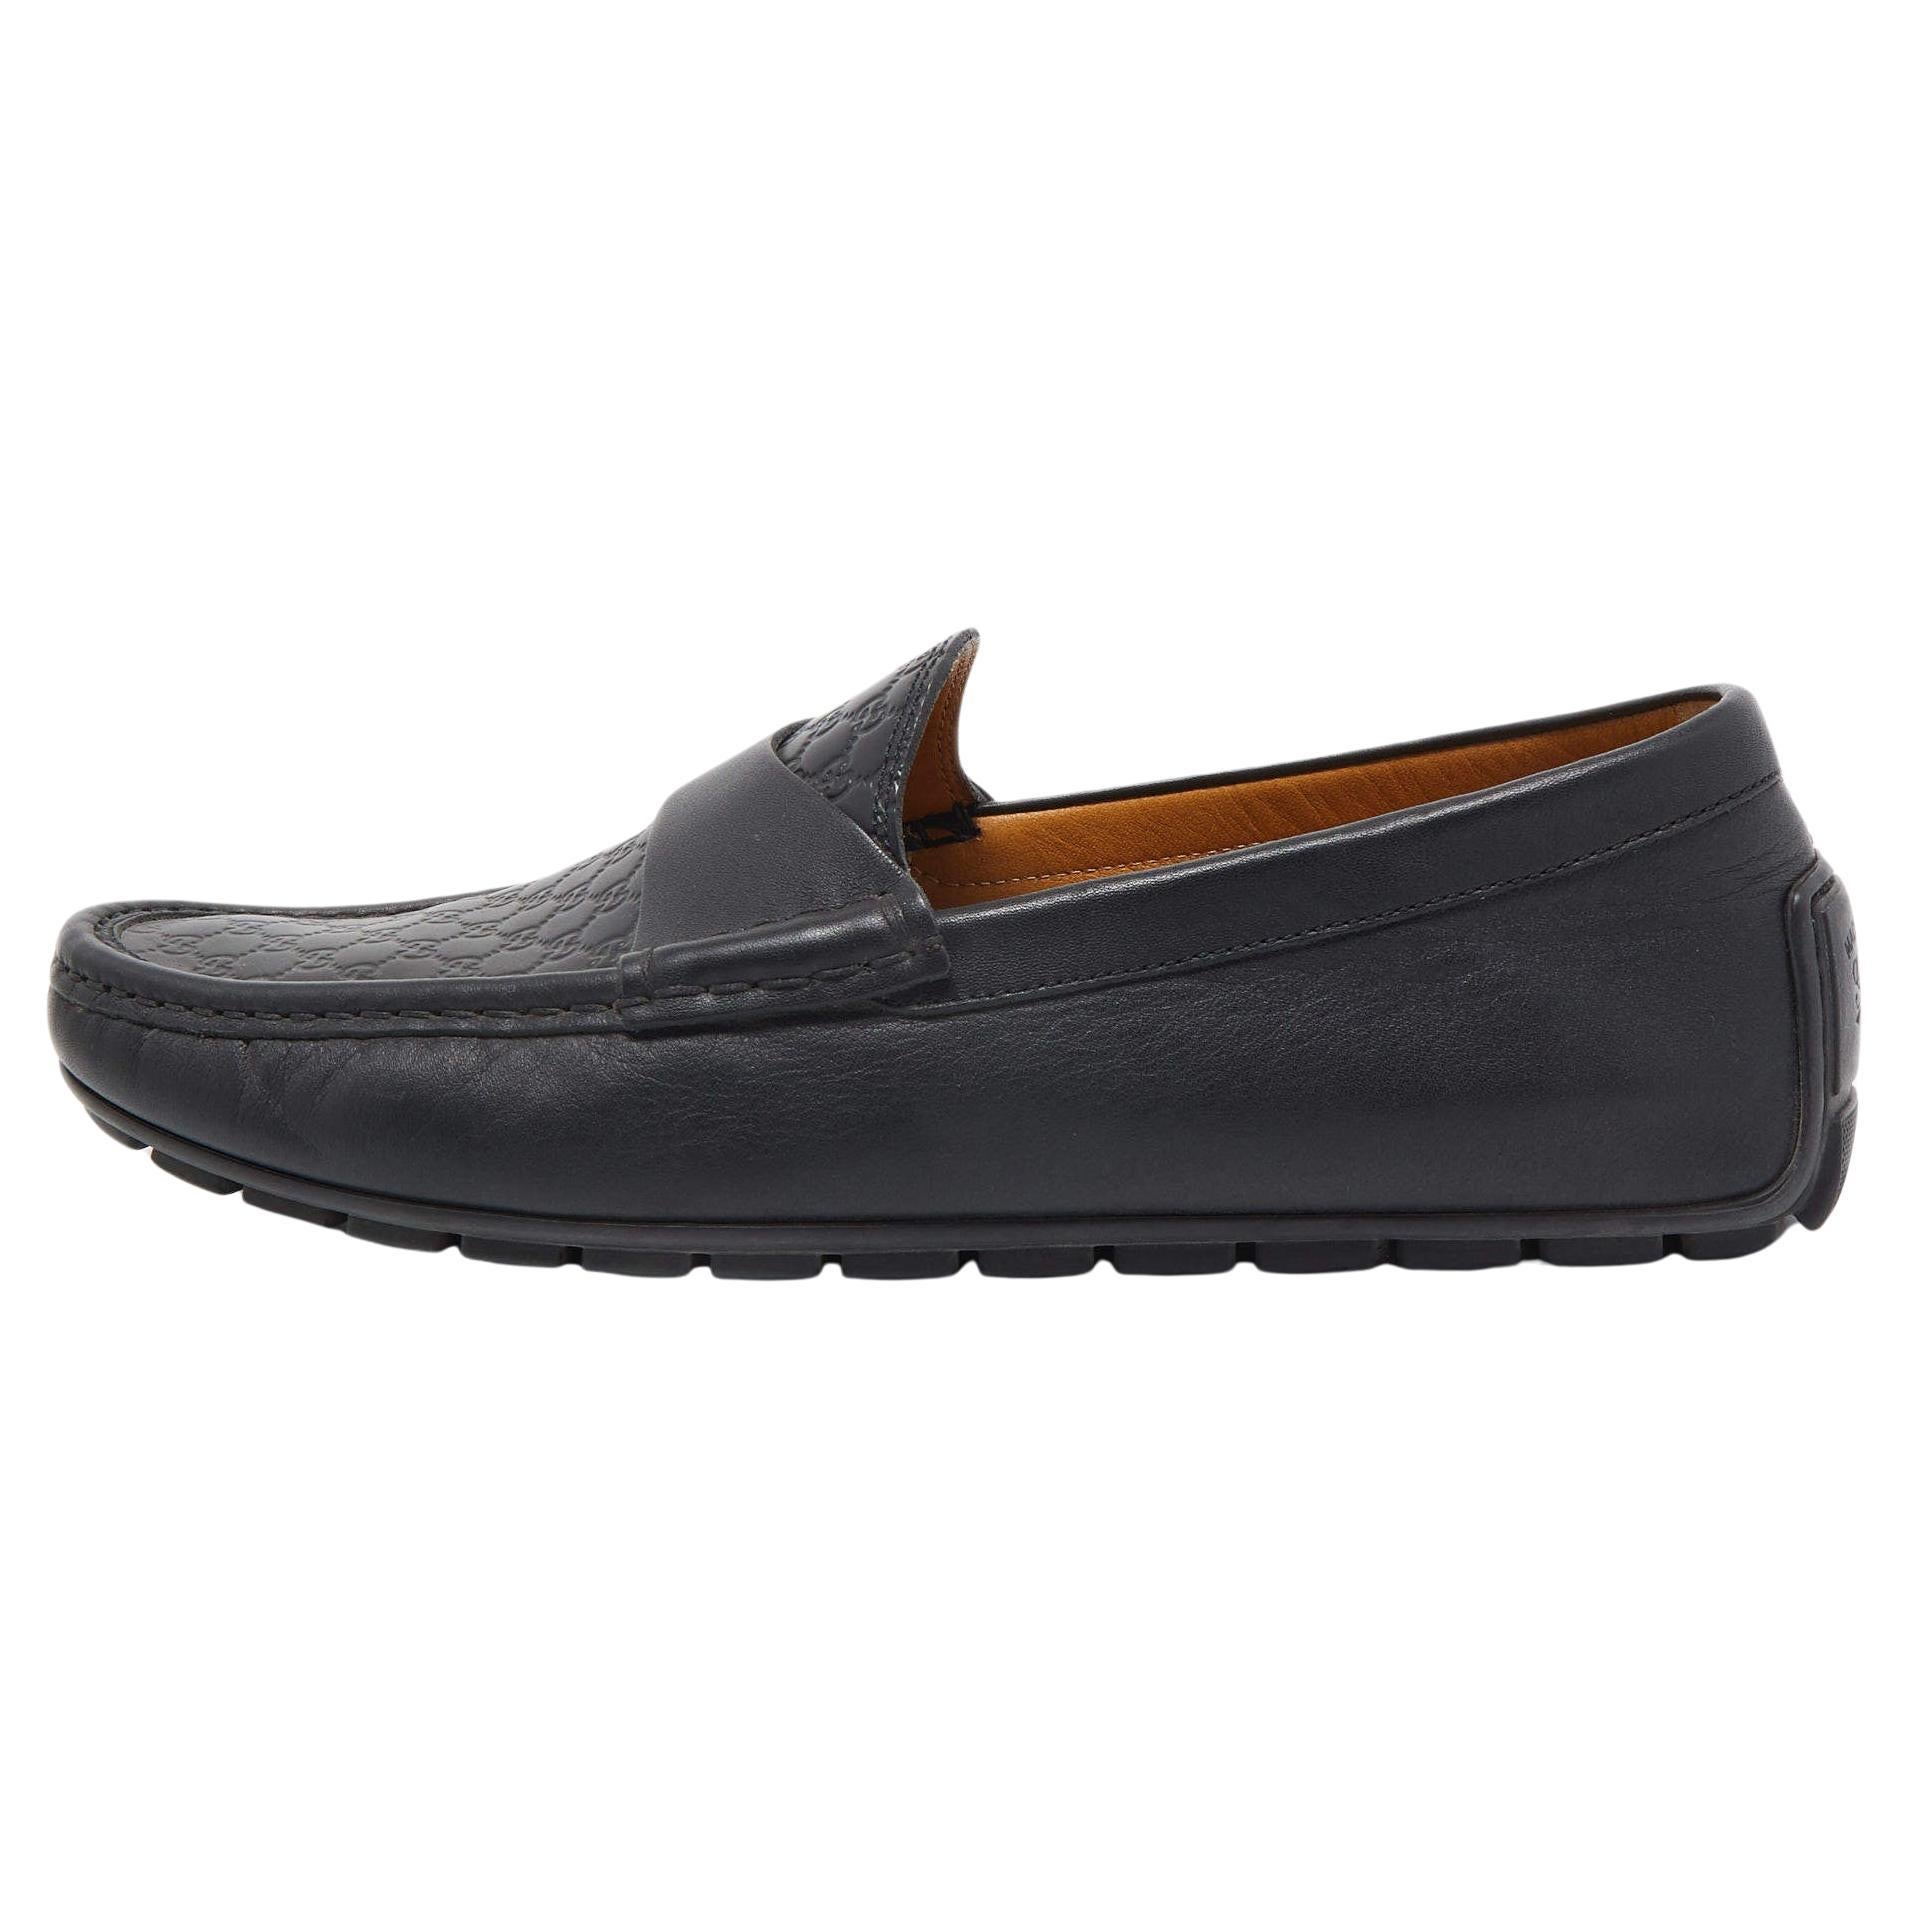 Gucci Black Guccissima Leather Slip On Loafers Size 40 For Sale